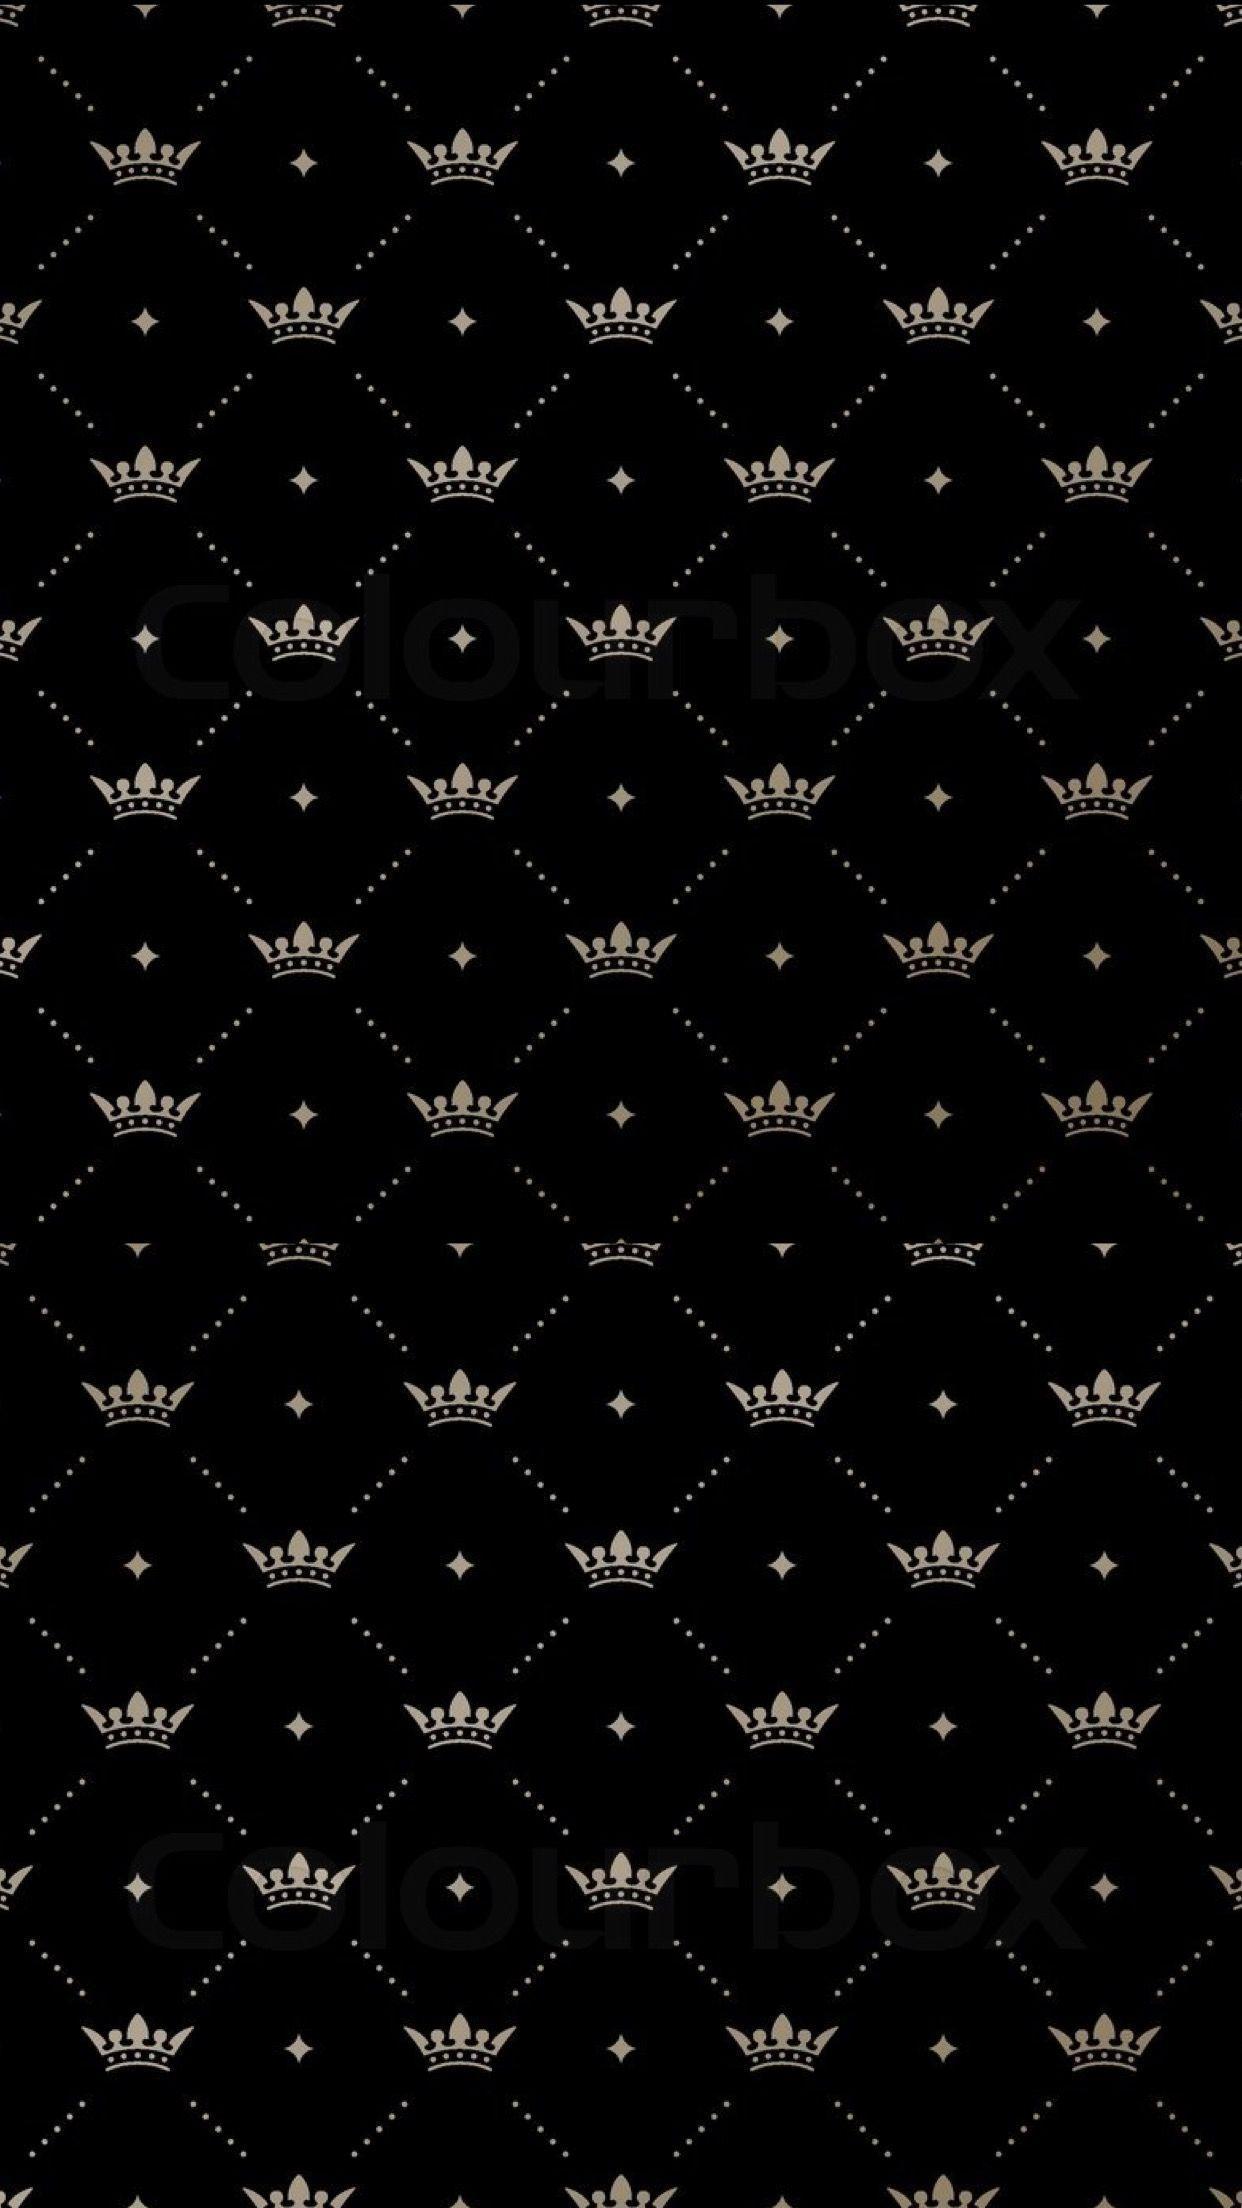 Crowns. Wallpaper background